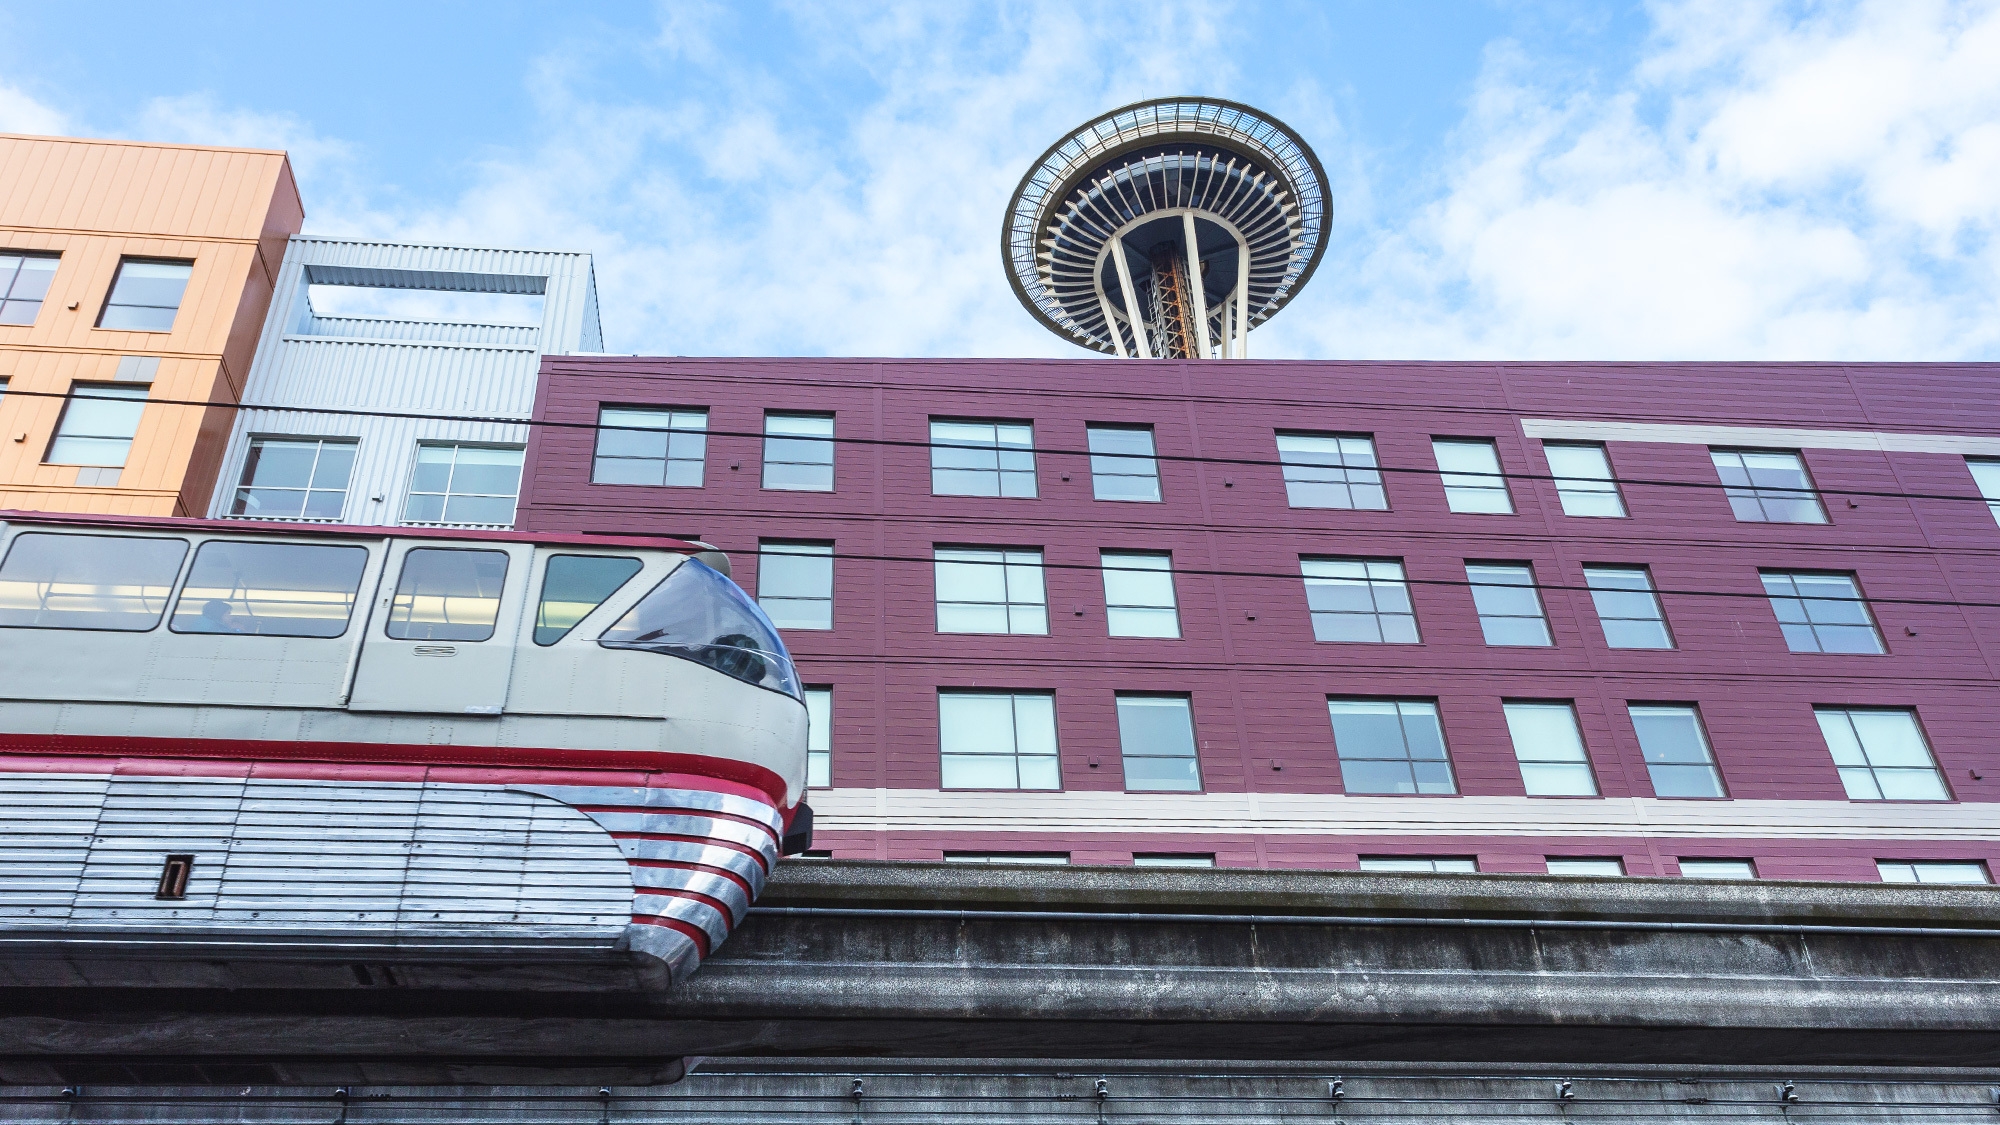 A train passes by a housing complex with the Seattle Space Needle in the skyline.